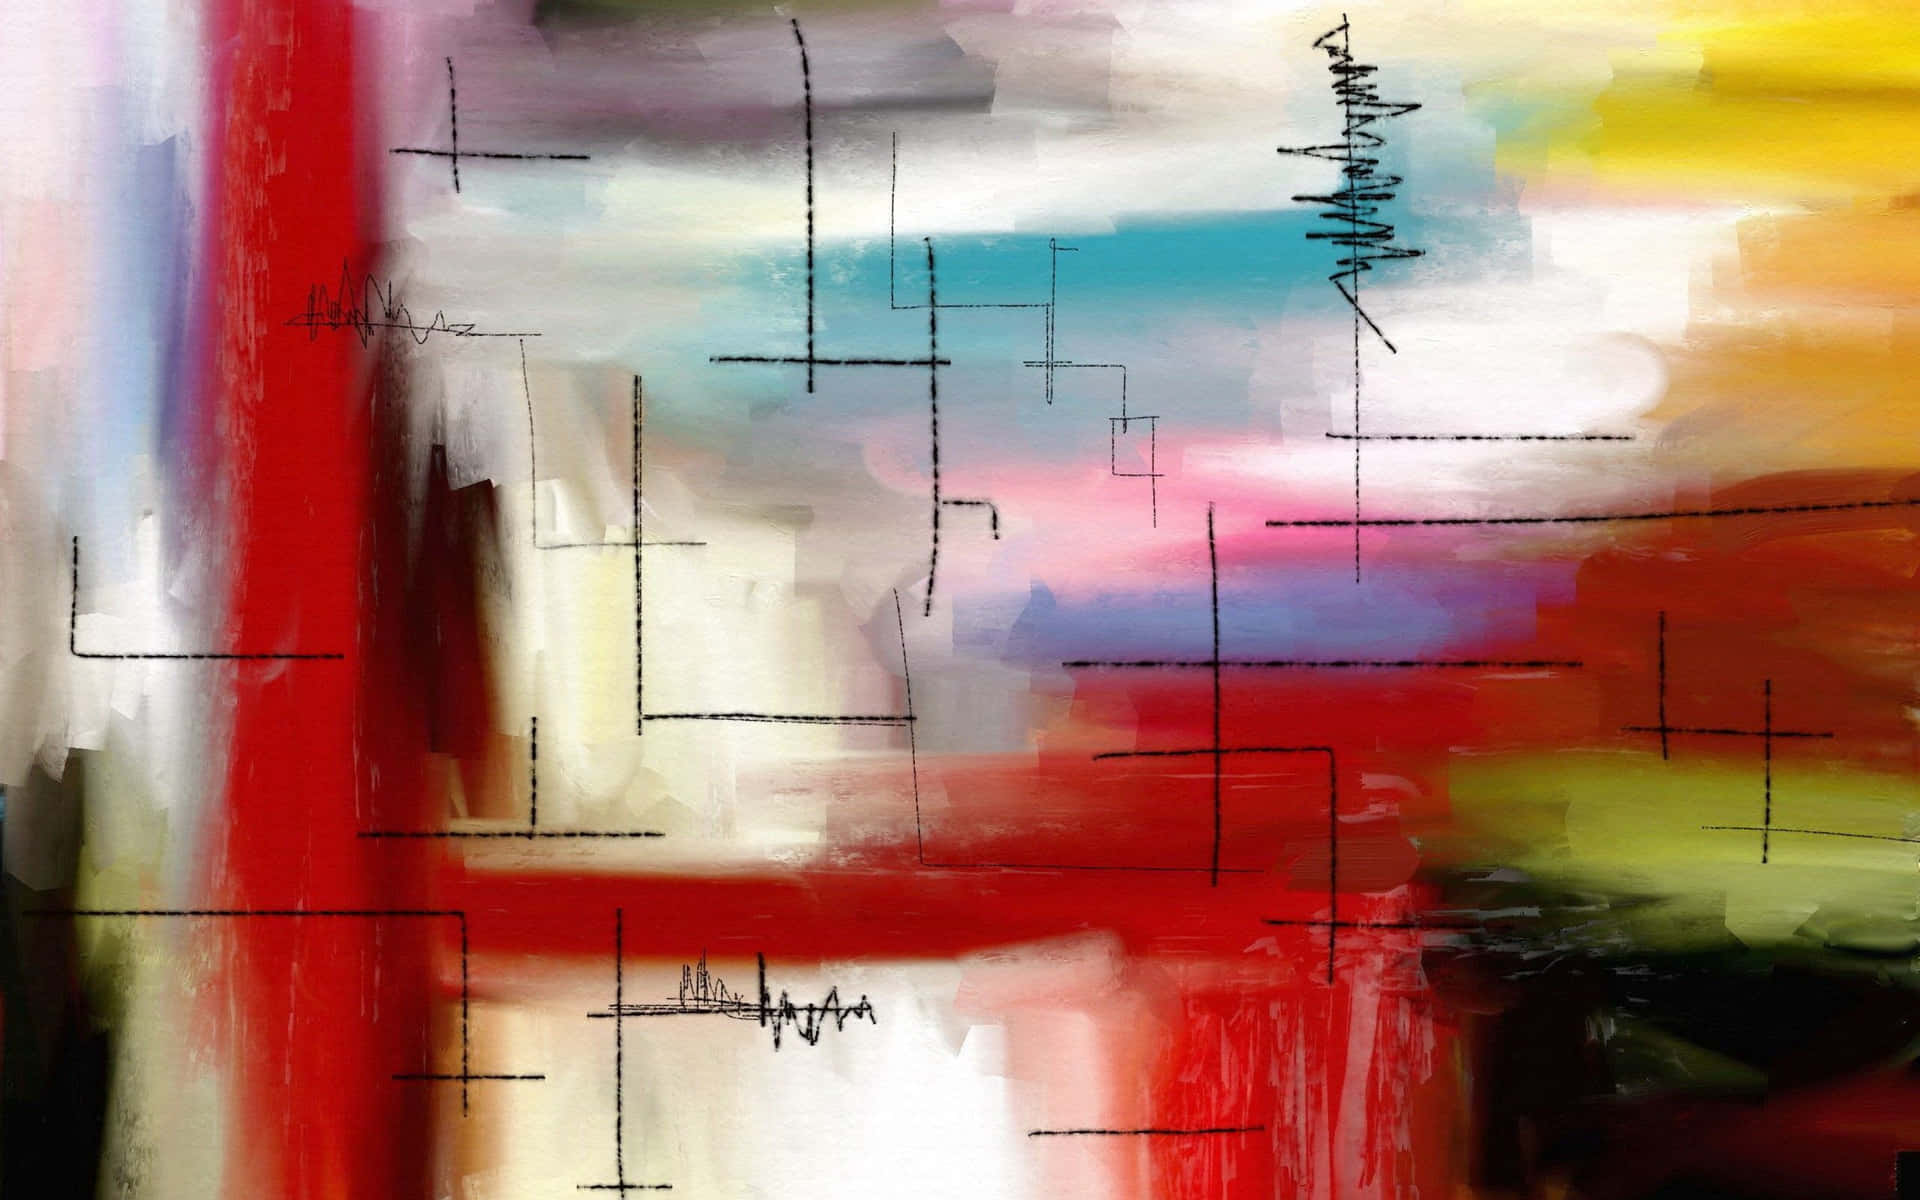 This beautiful abstract painting is filled with a sense of motion and energy